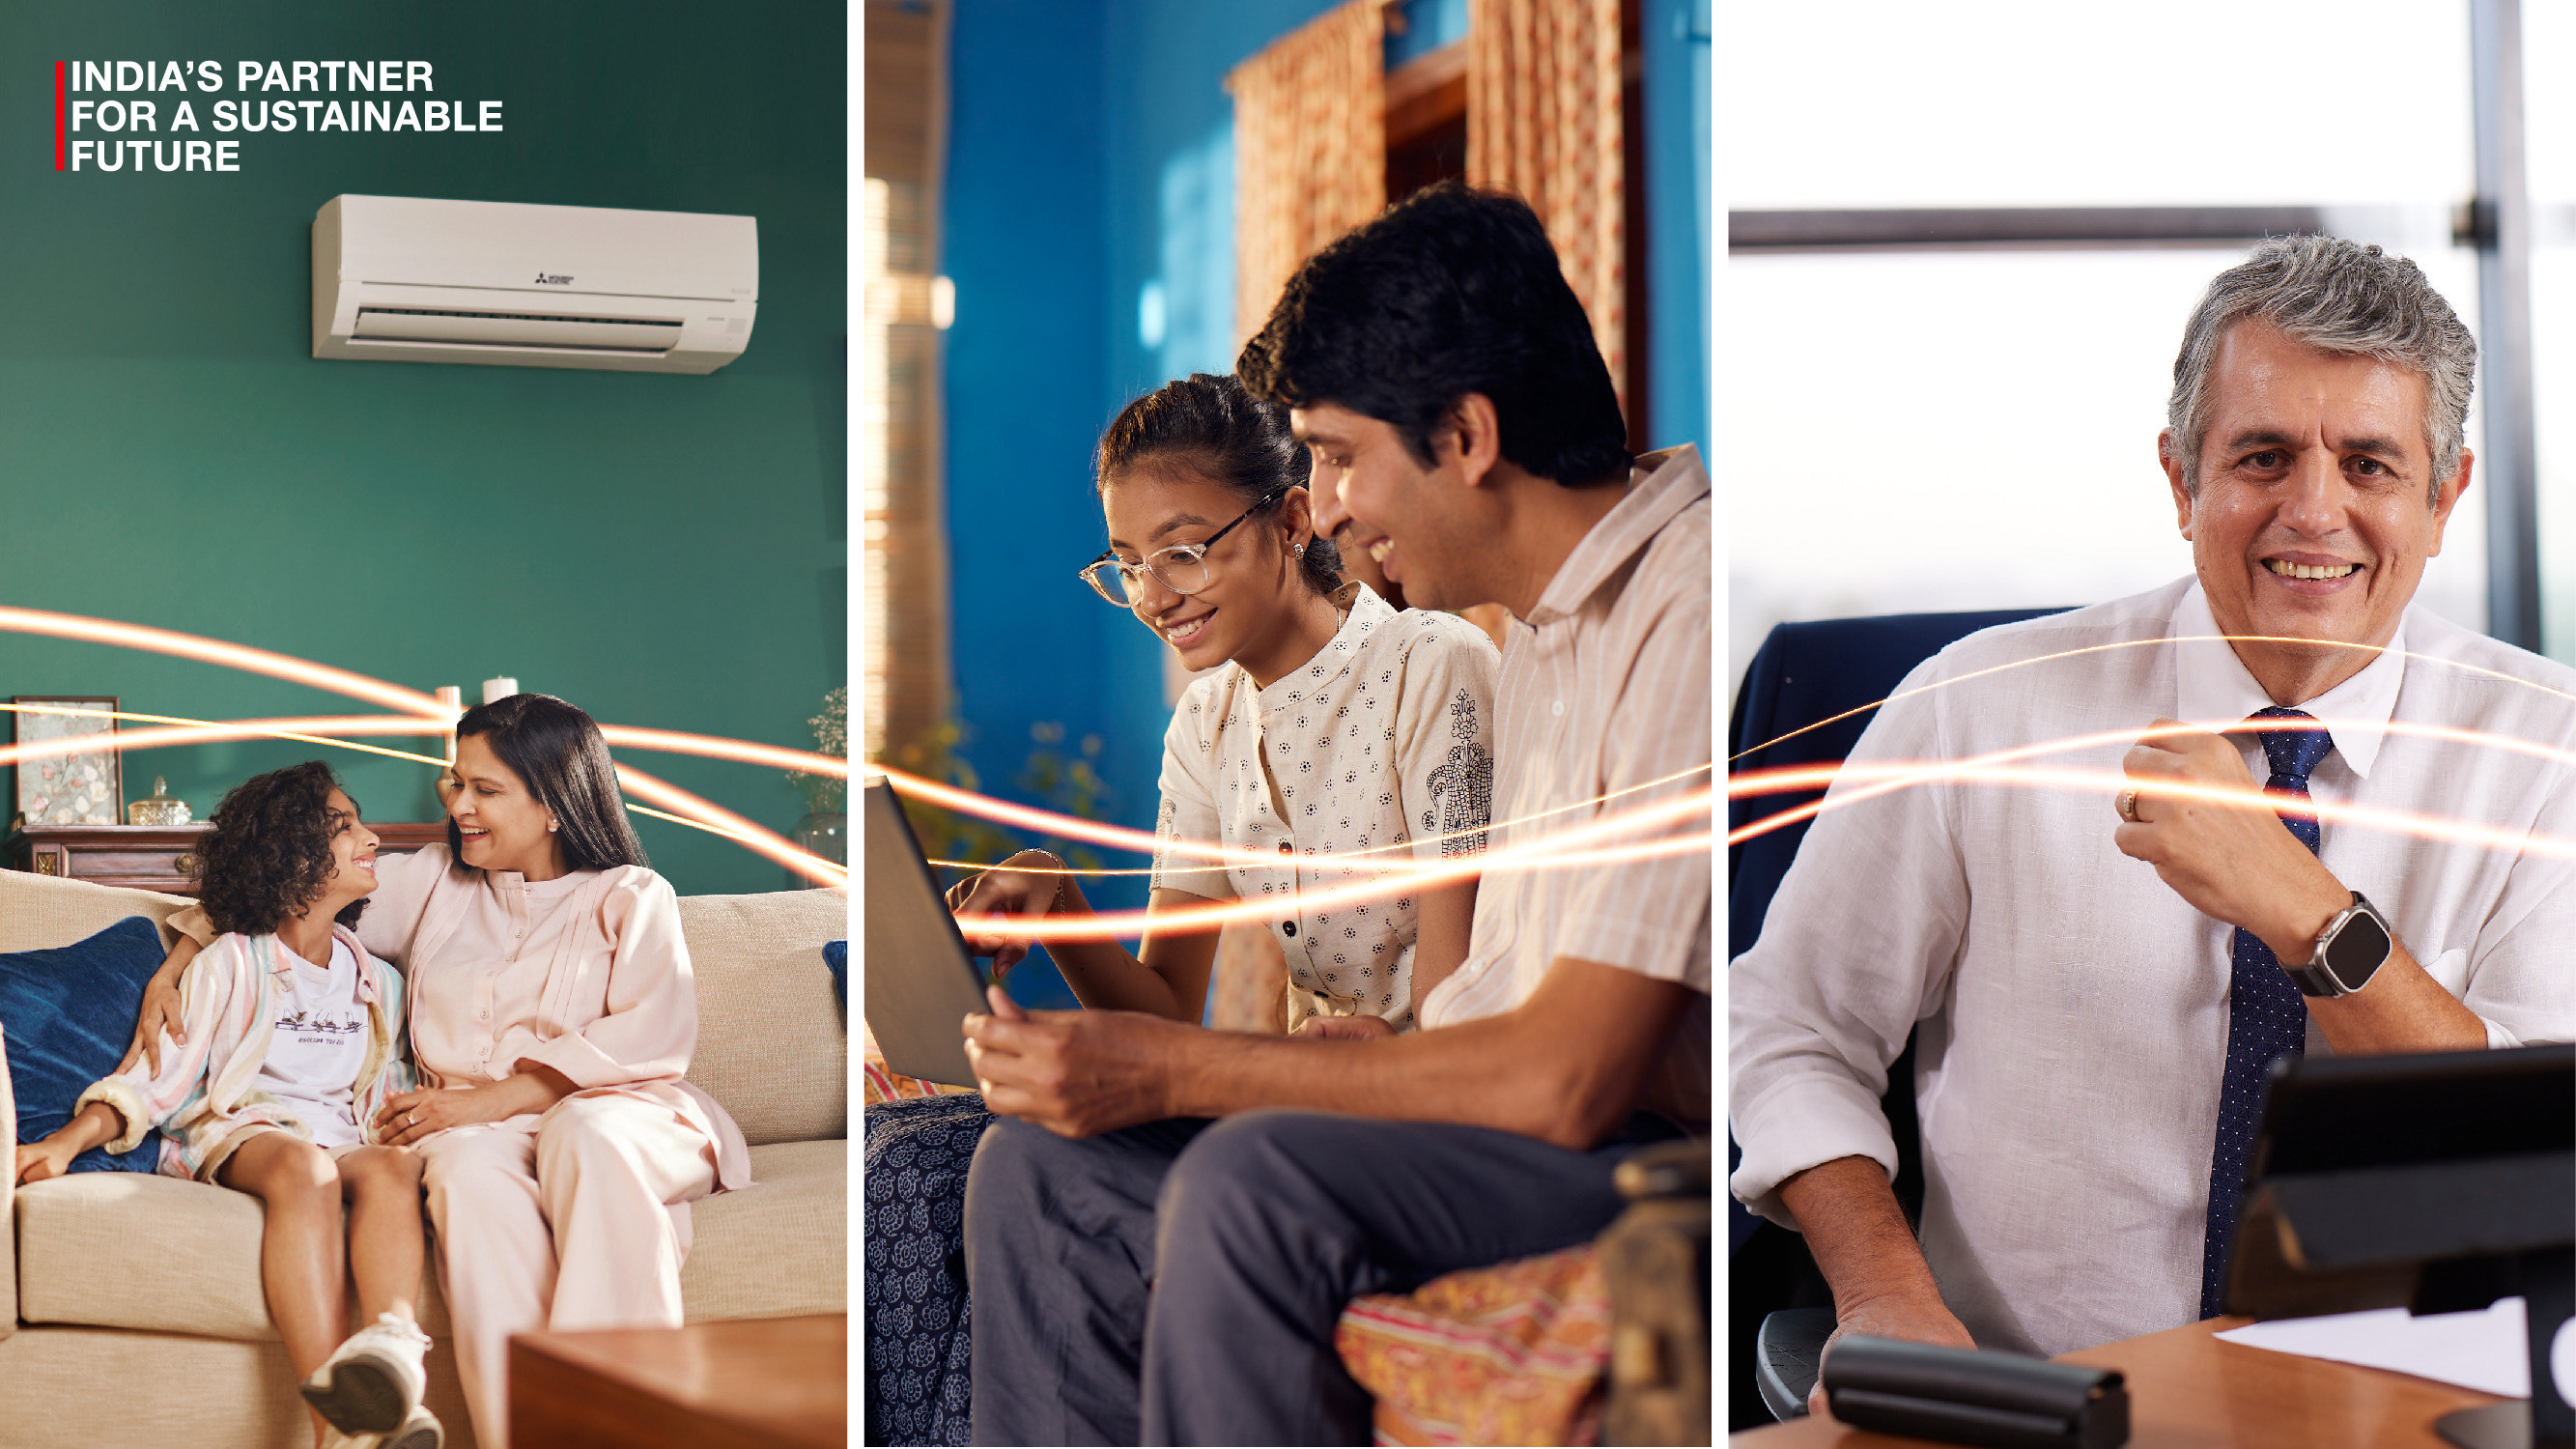 Mitsubishi Electric India Unveils a new development to its Brand Campaign “India’s Partner For A Sustainable Future”